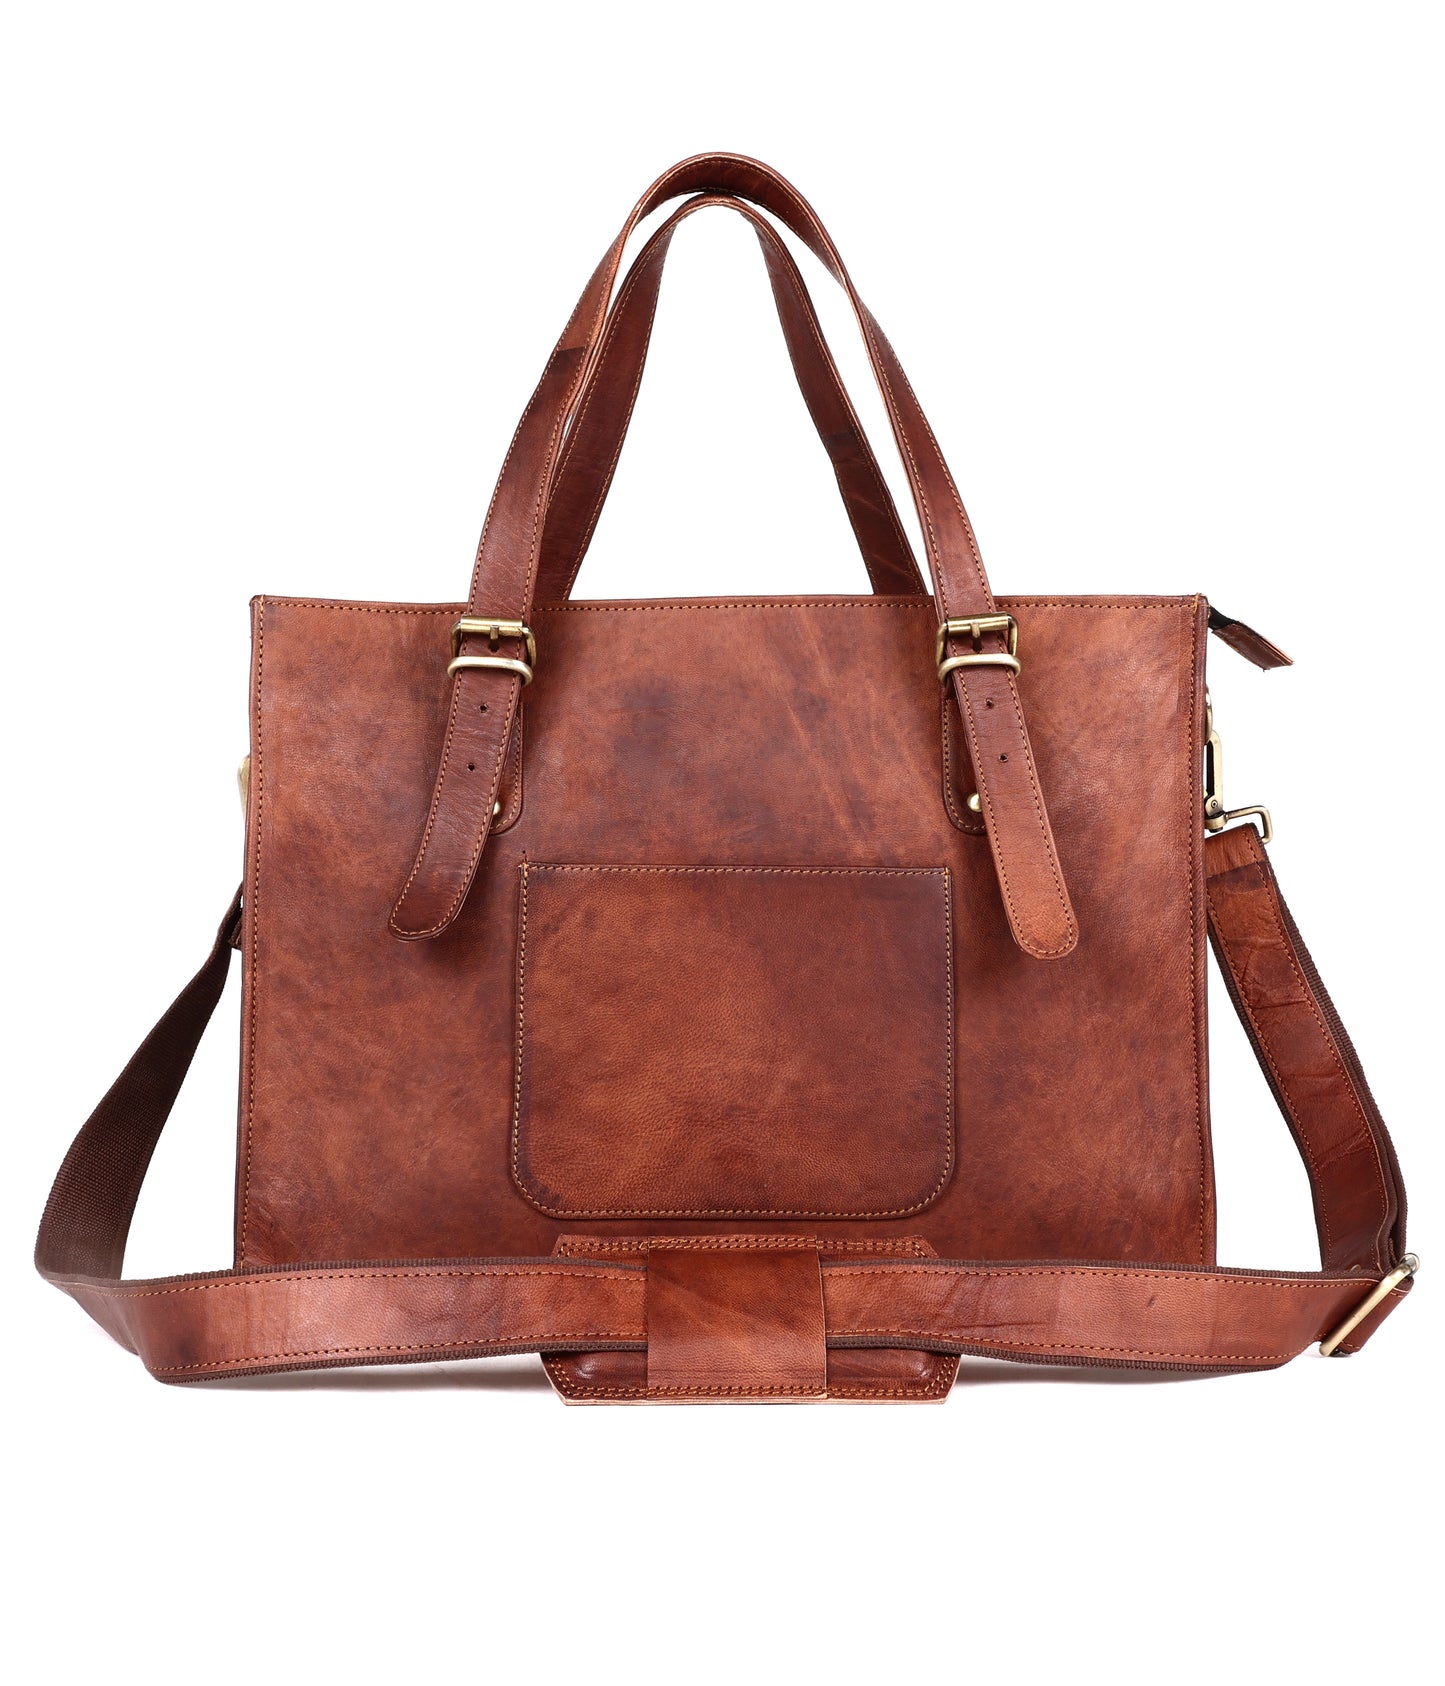 Leather Woman Laptop Handbag Large Tote Bag with Zipper